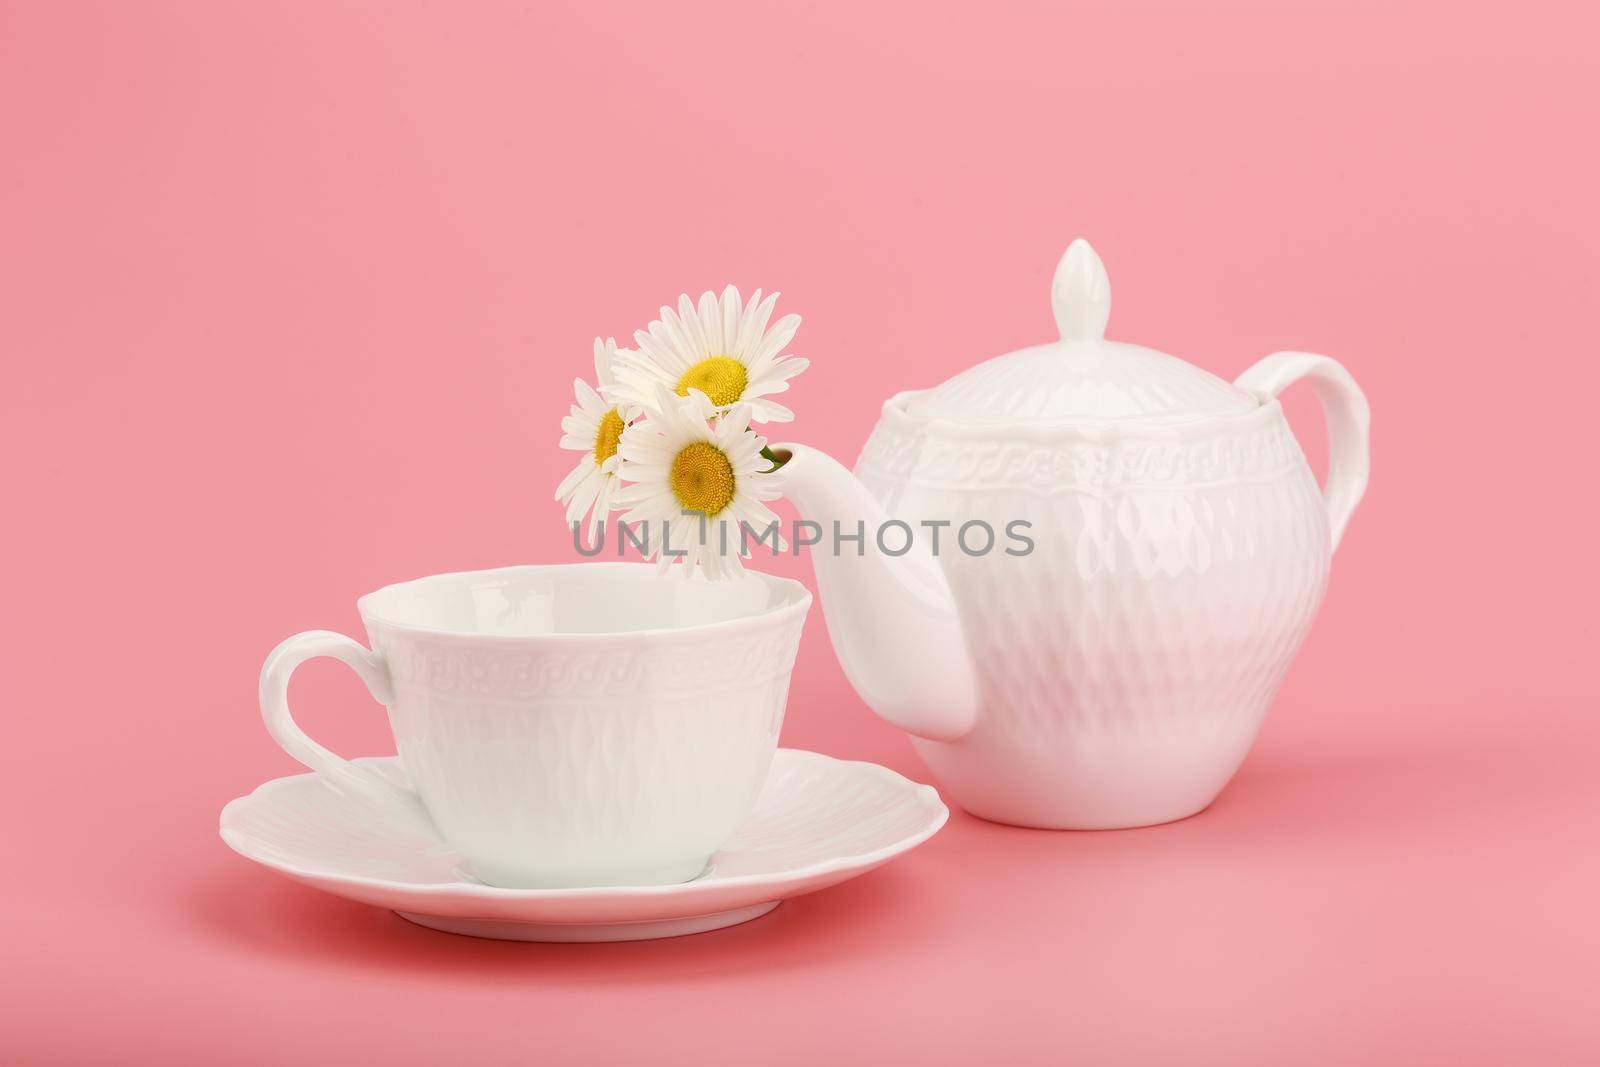 White tea pot with camomile flowers and tea cup on pink background. Concept of herbal tea and healthy lifestyle by Senorina_Irina